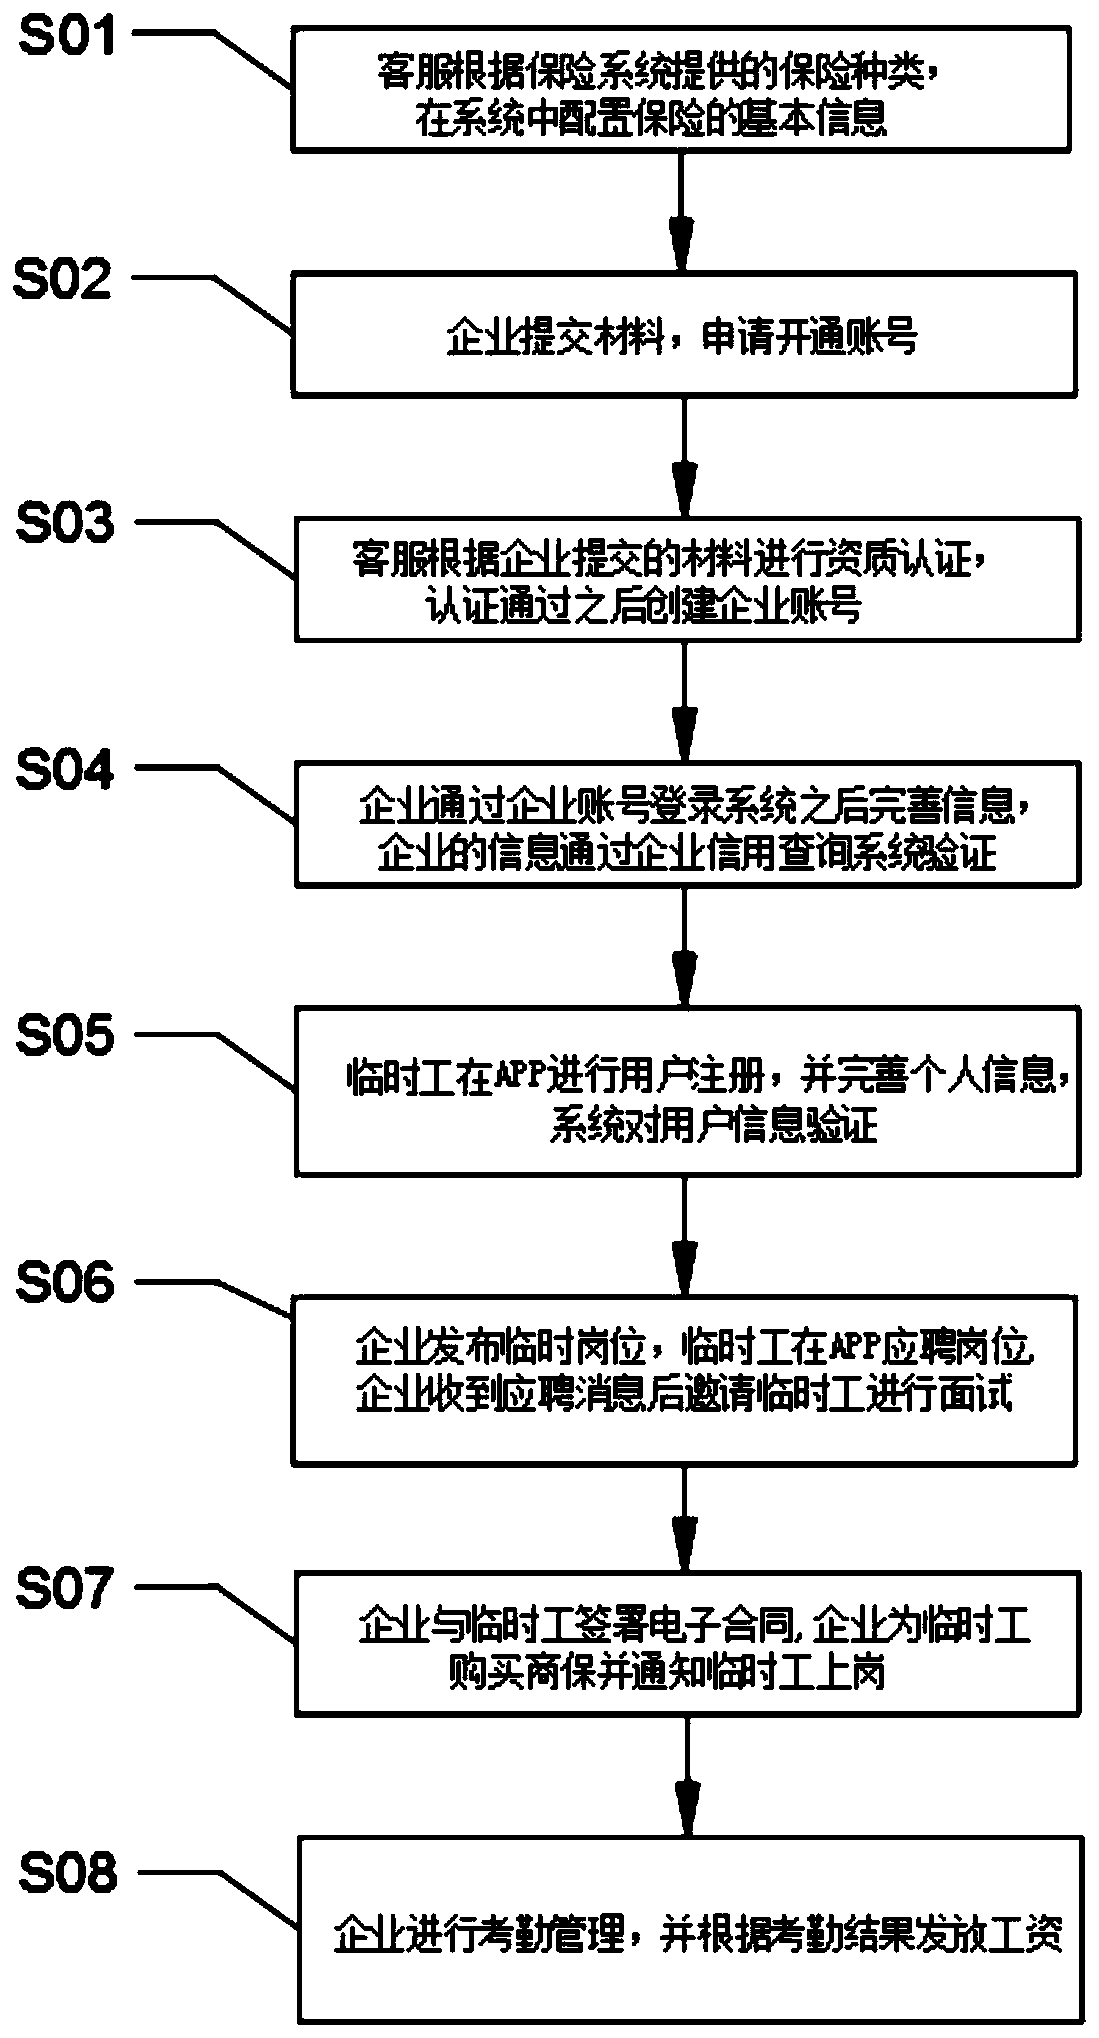 Immediate worker online management system based on Internet technology, and management method thereof